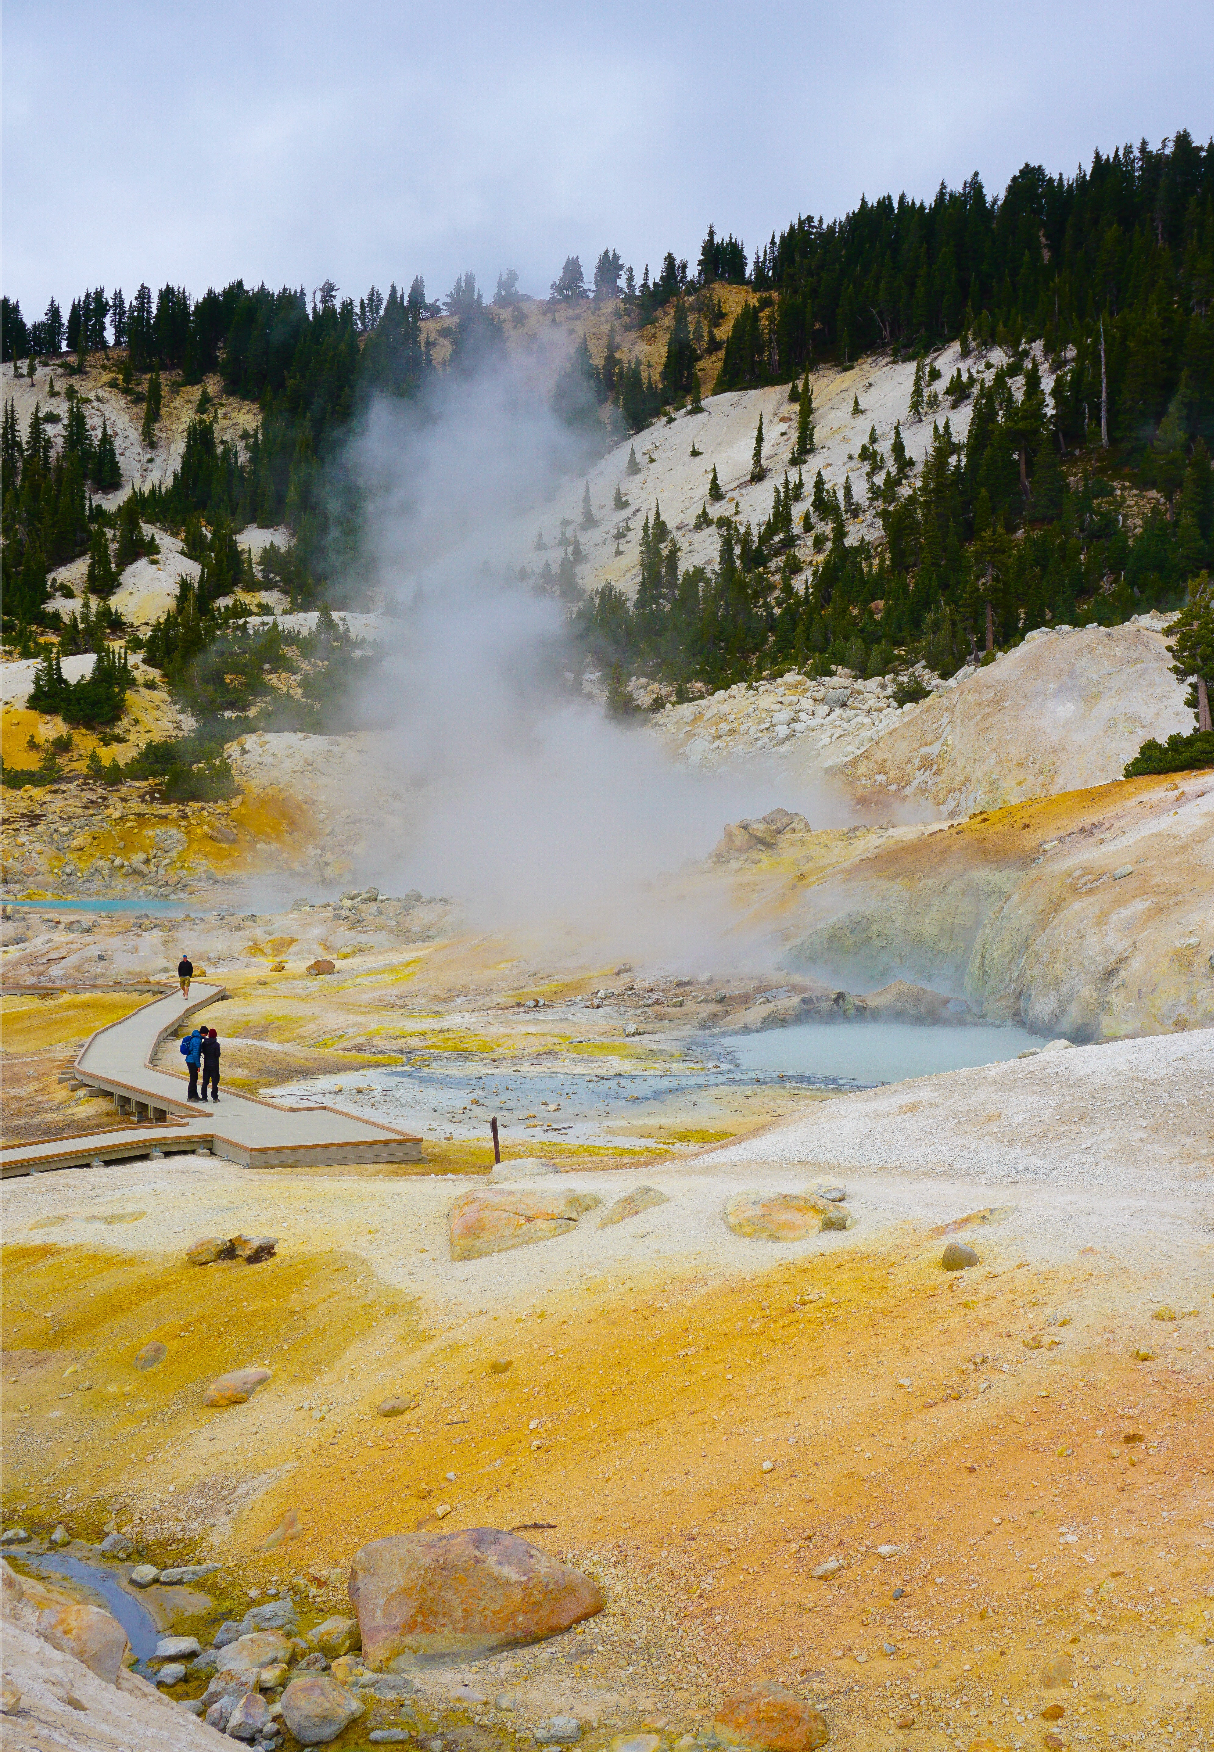 5 Incredible Hikes You Need to Take at Lassen Volcanic National Park